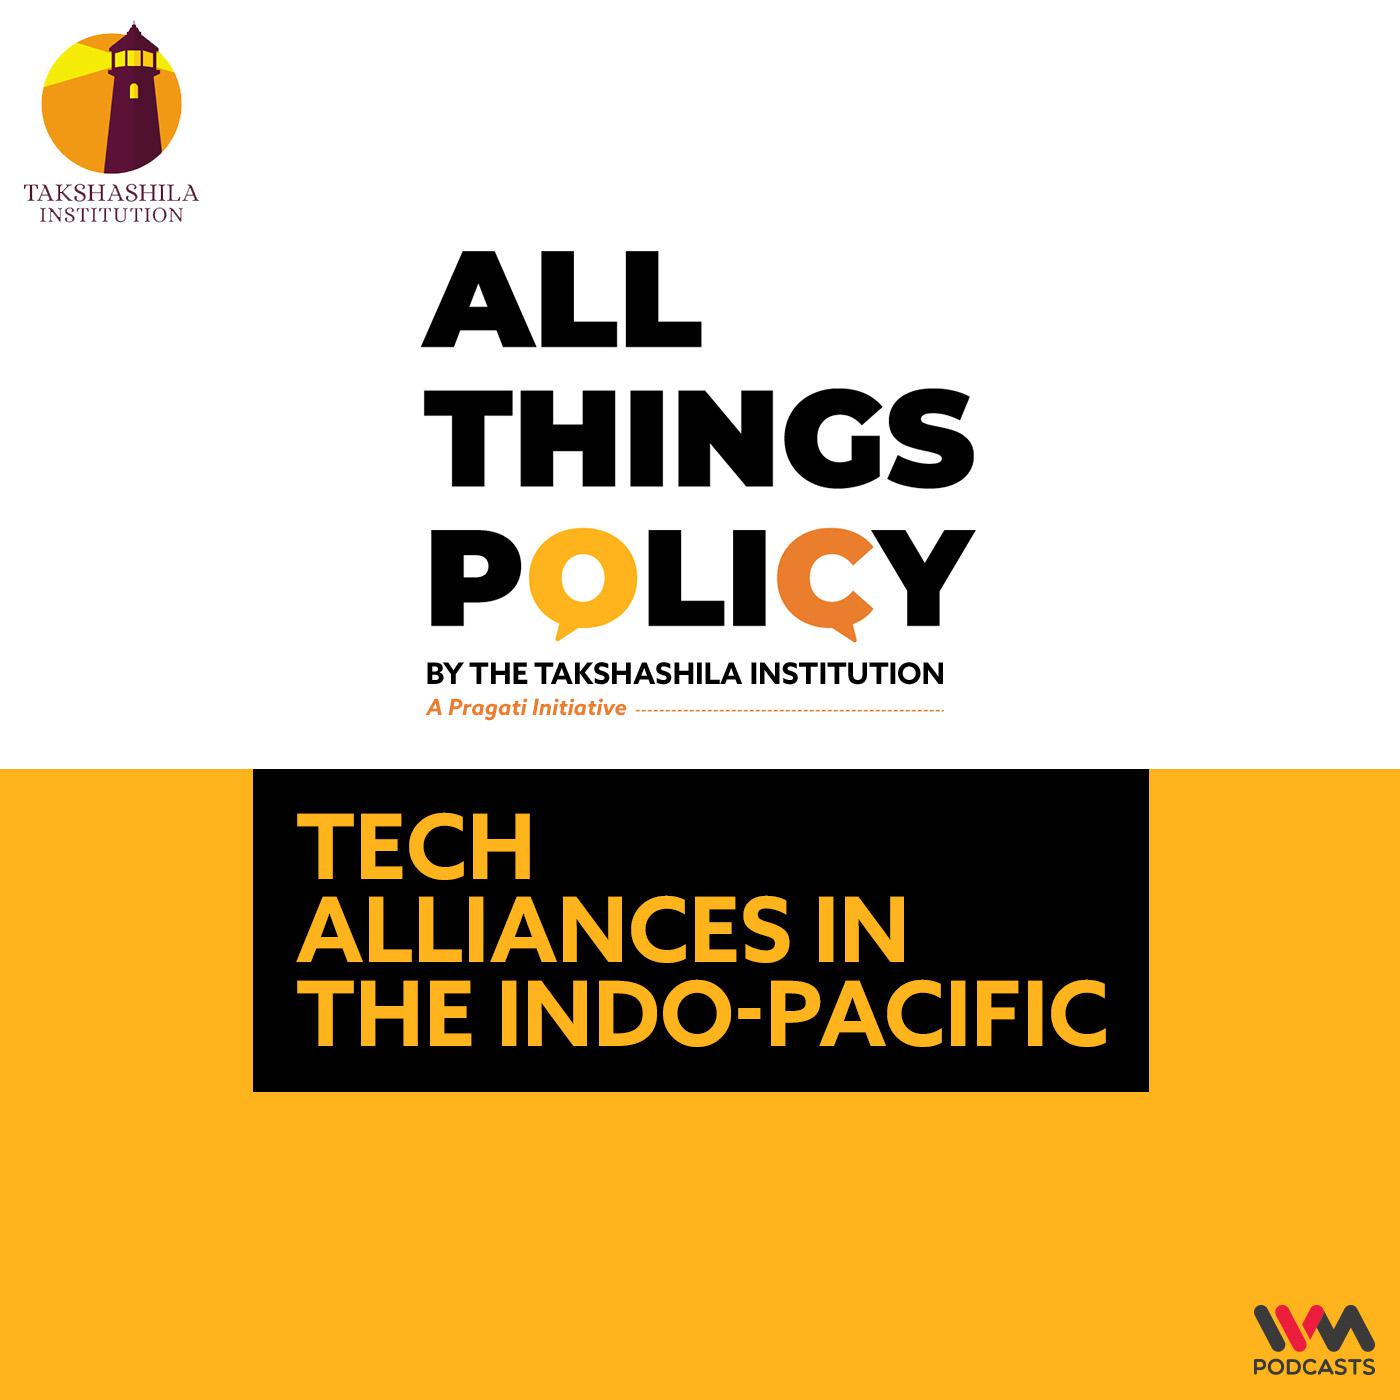 Tech Alliances in the Indo-Pacific